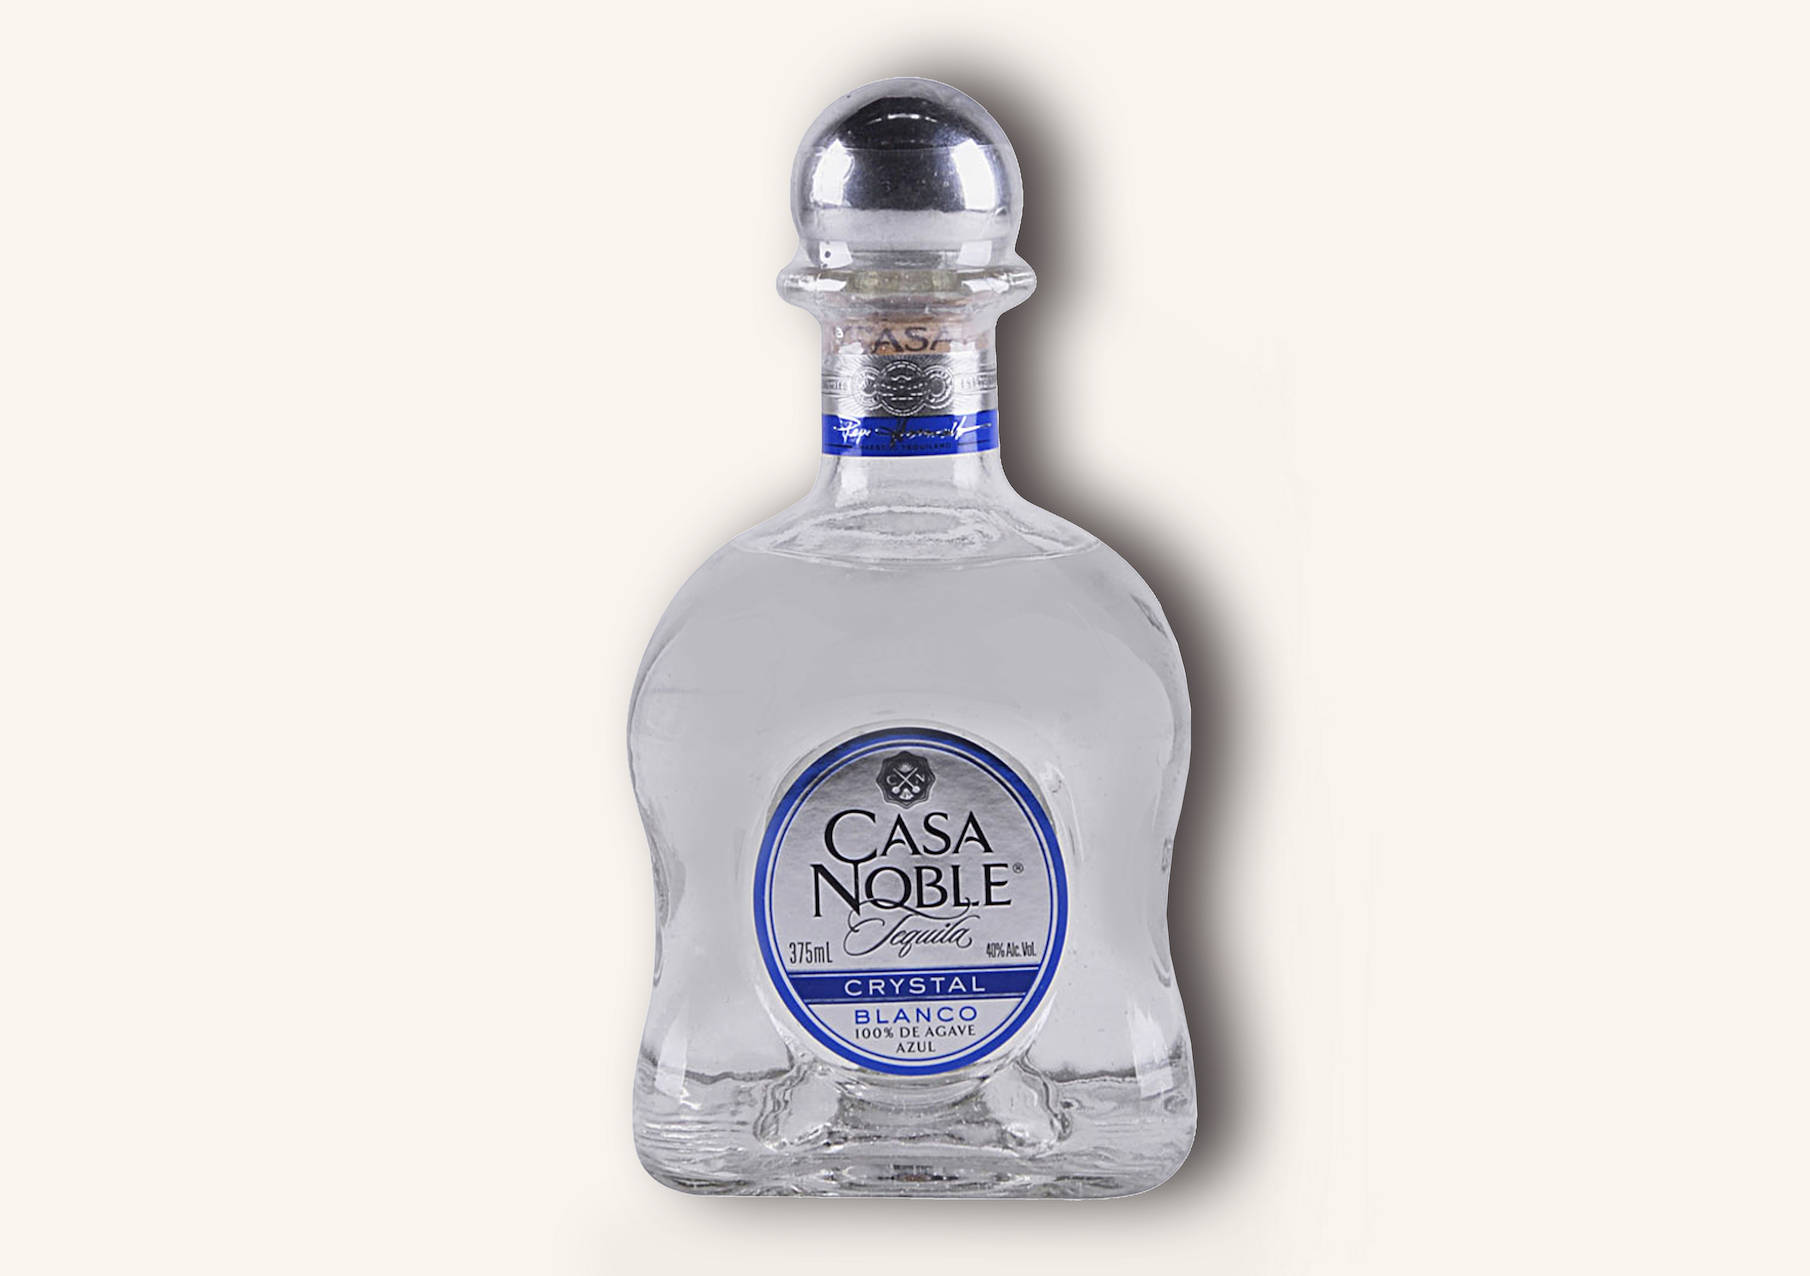 Casanoble Crystal Blanco Remains Unchanged When Translated Into German, As It Is A Brand Name For A Type Of Tequila And Doesn't Have Specific Connotations Related To Computer Or Mobile Wallpaper. Wallpaper